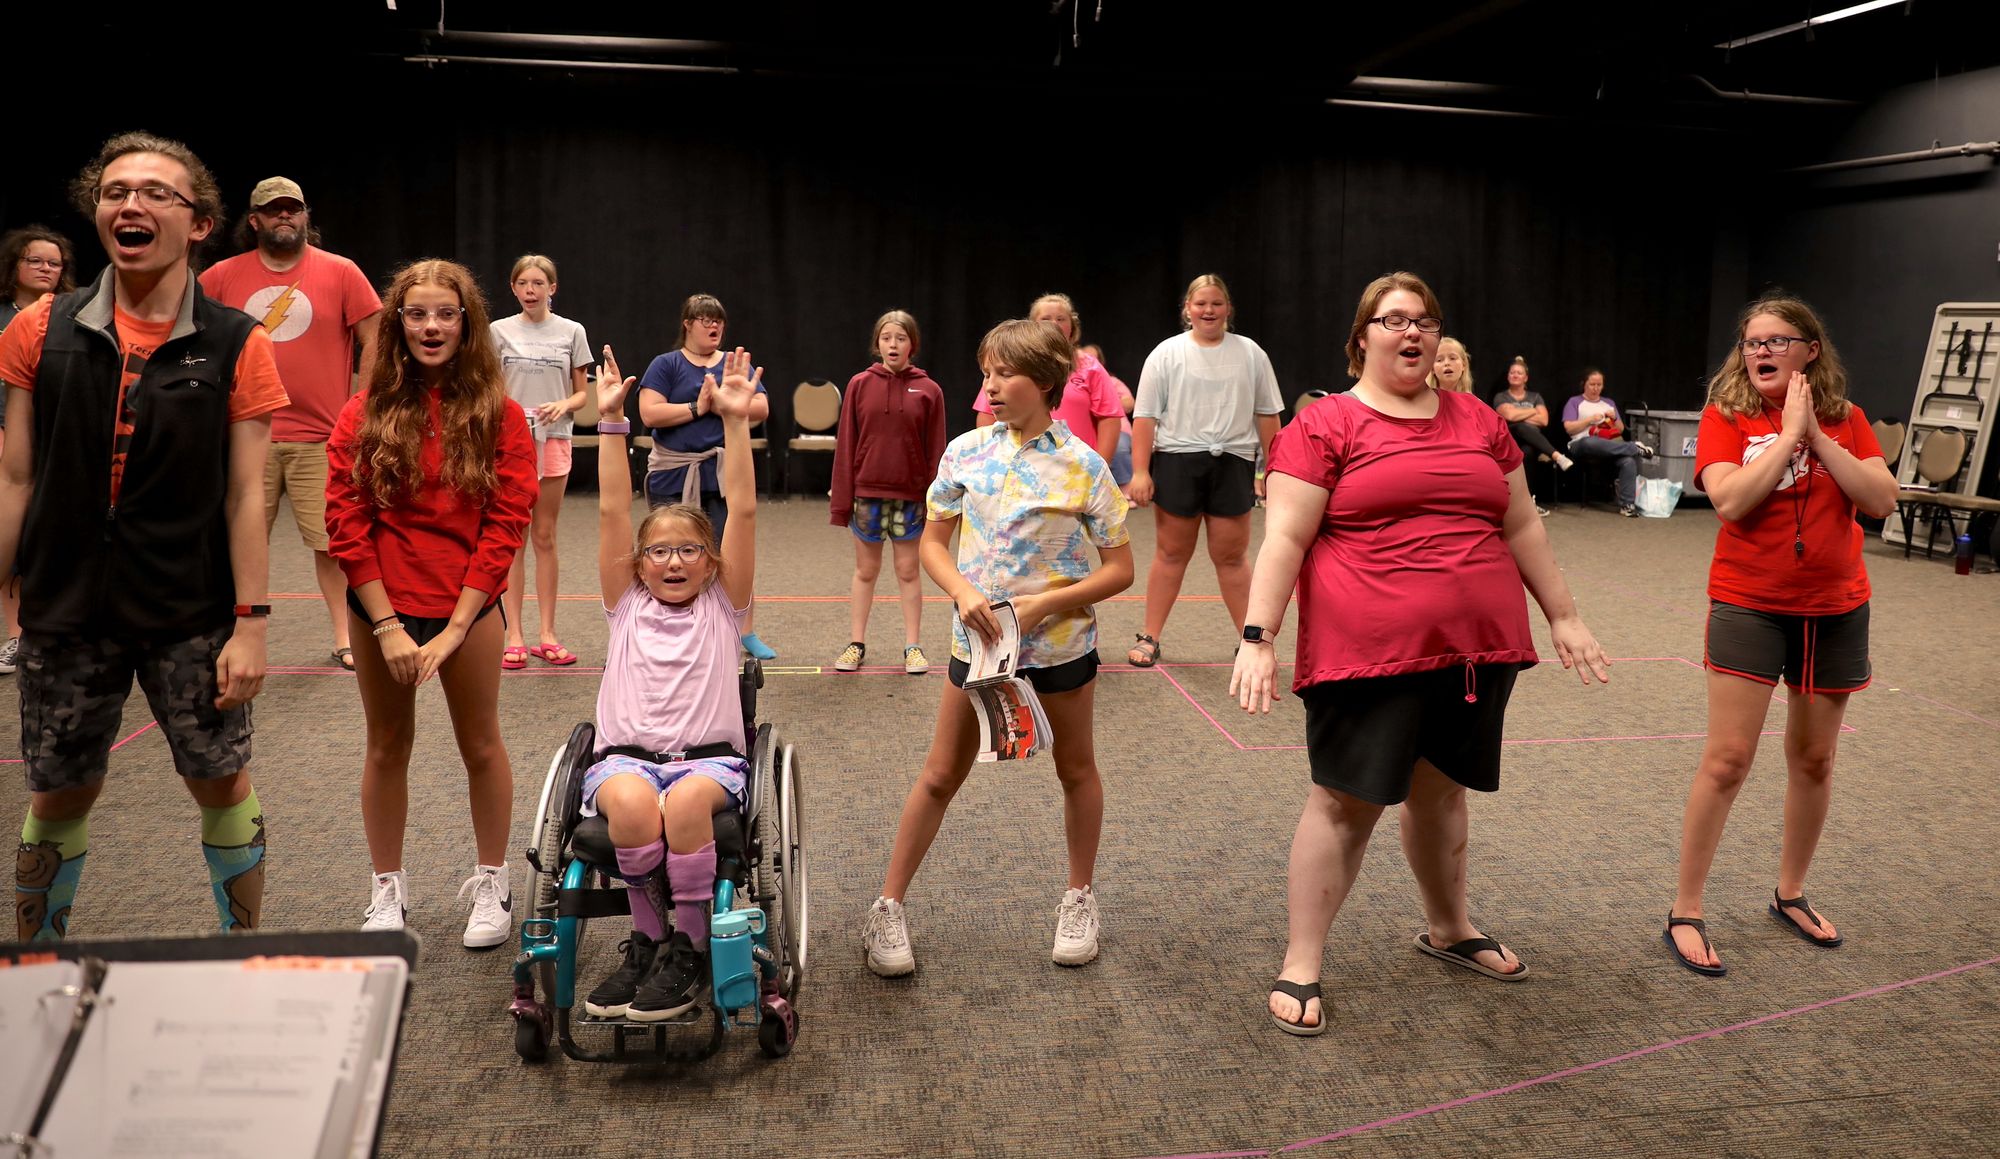 This new theater program gives kids of all abilities the stage